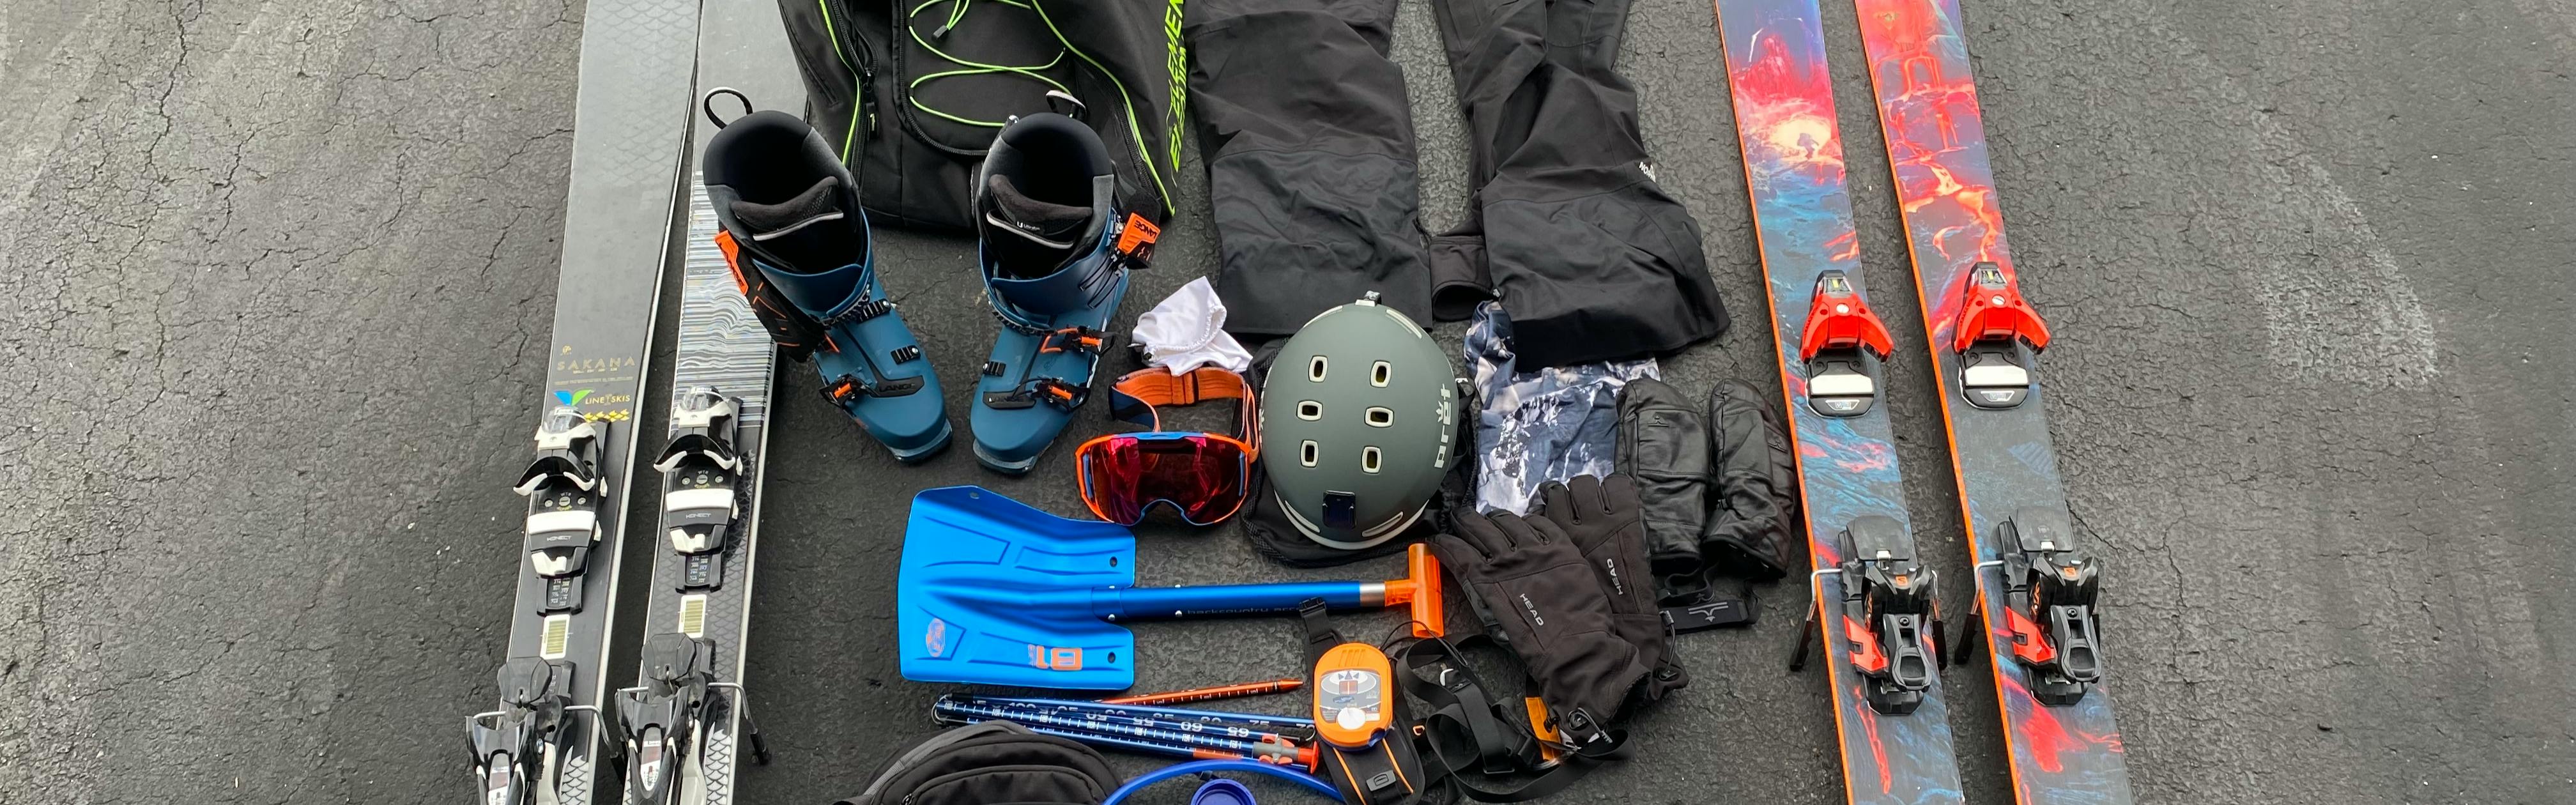 What Keep in My Ski Bag for Day on Slopes | Curated.com